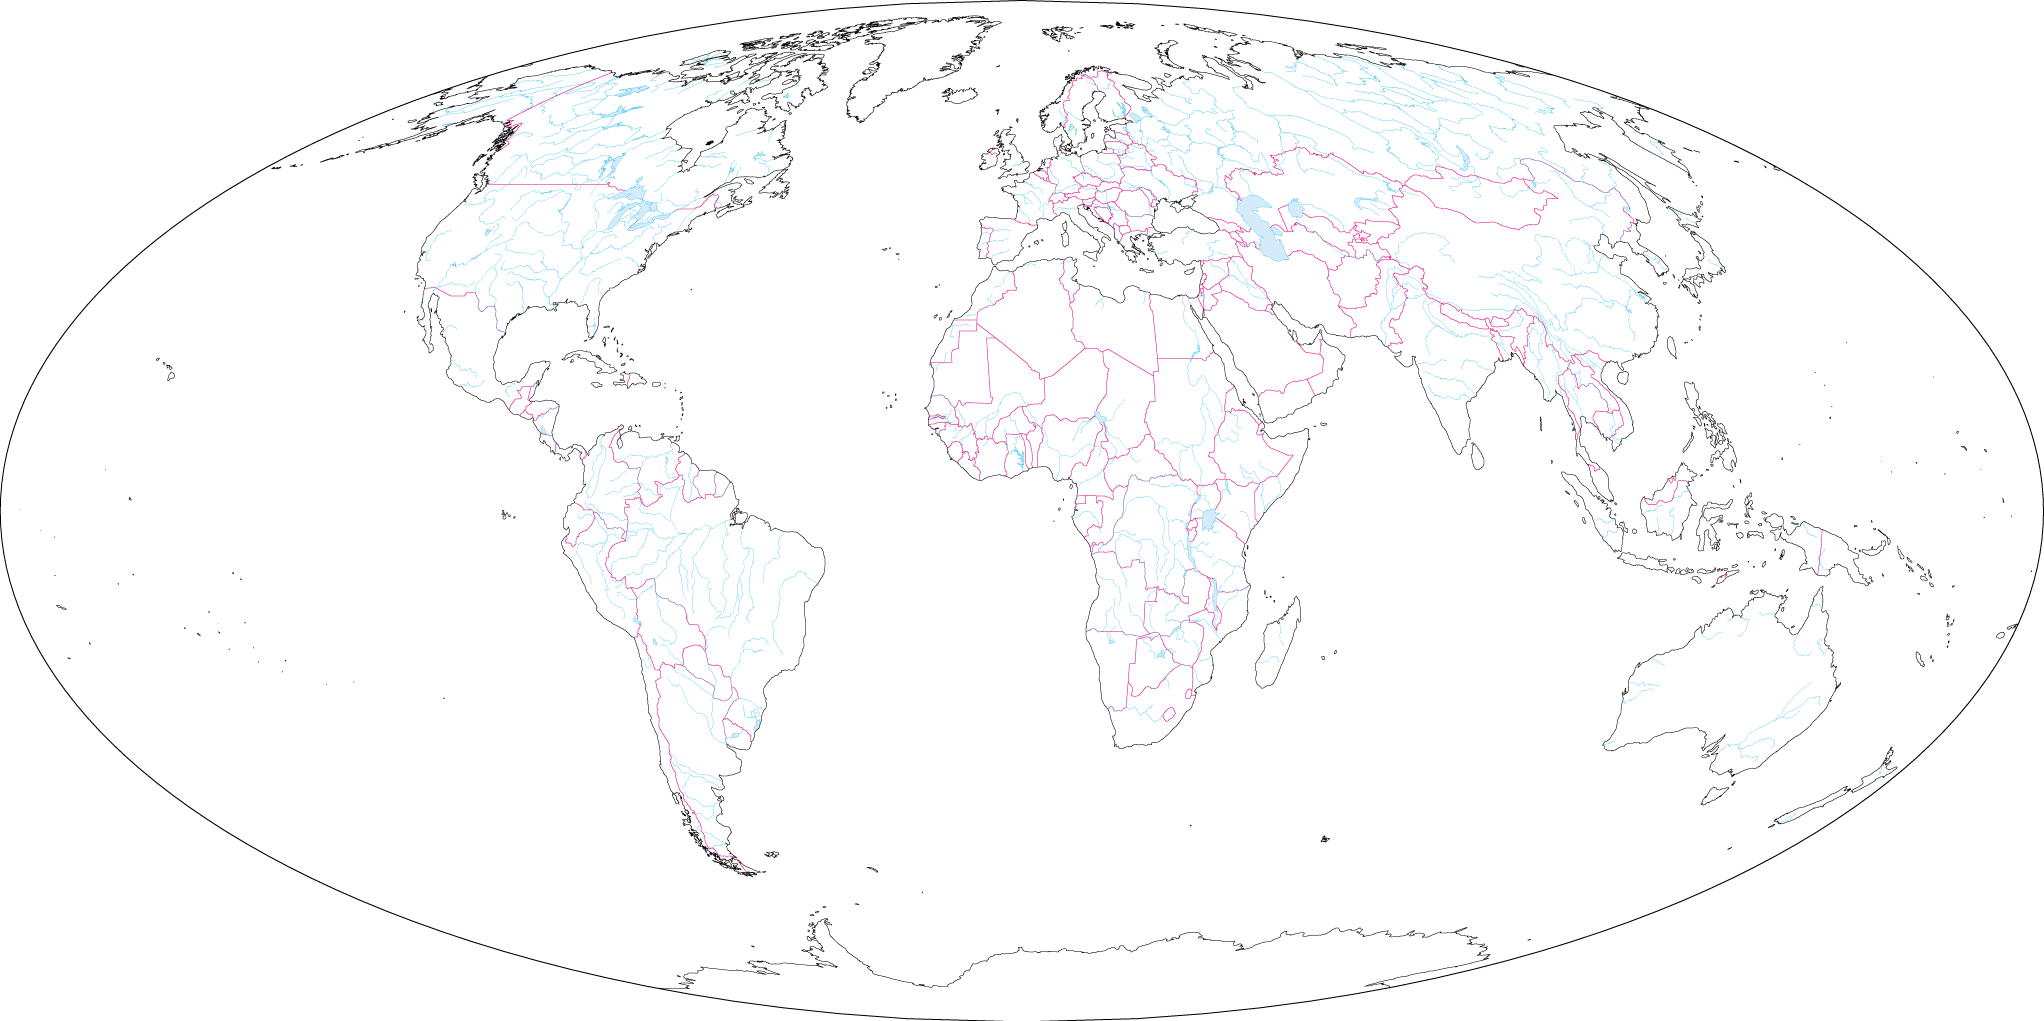 Mollwide projection - Europe center (With borders) image